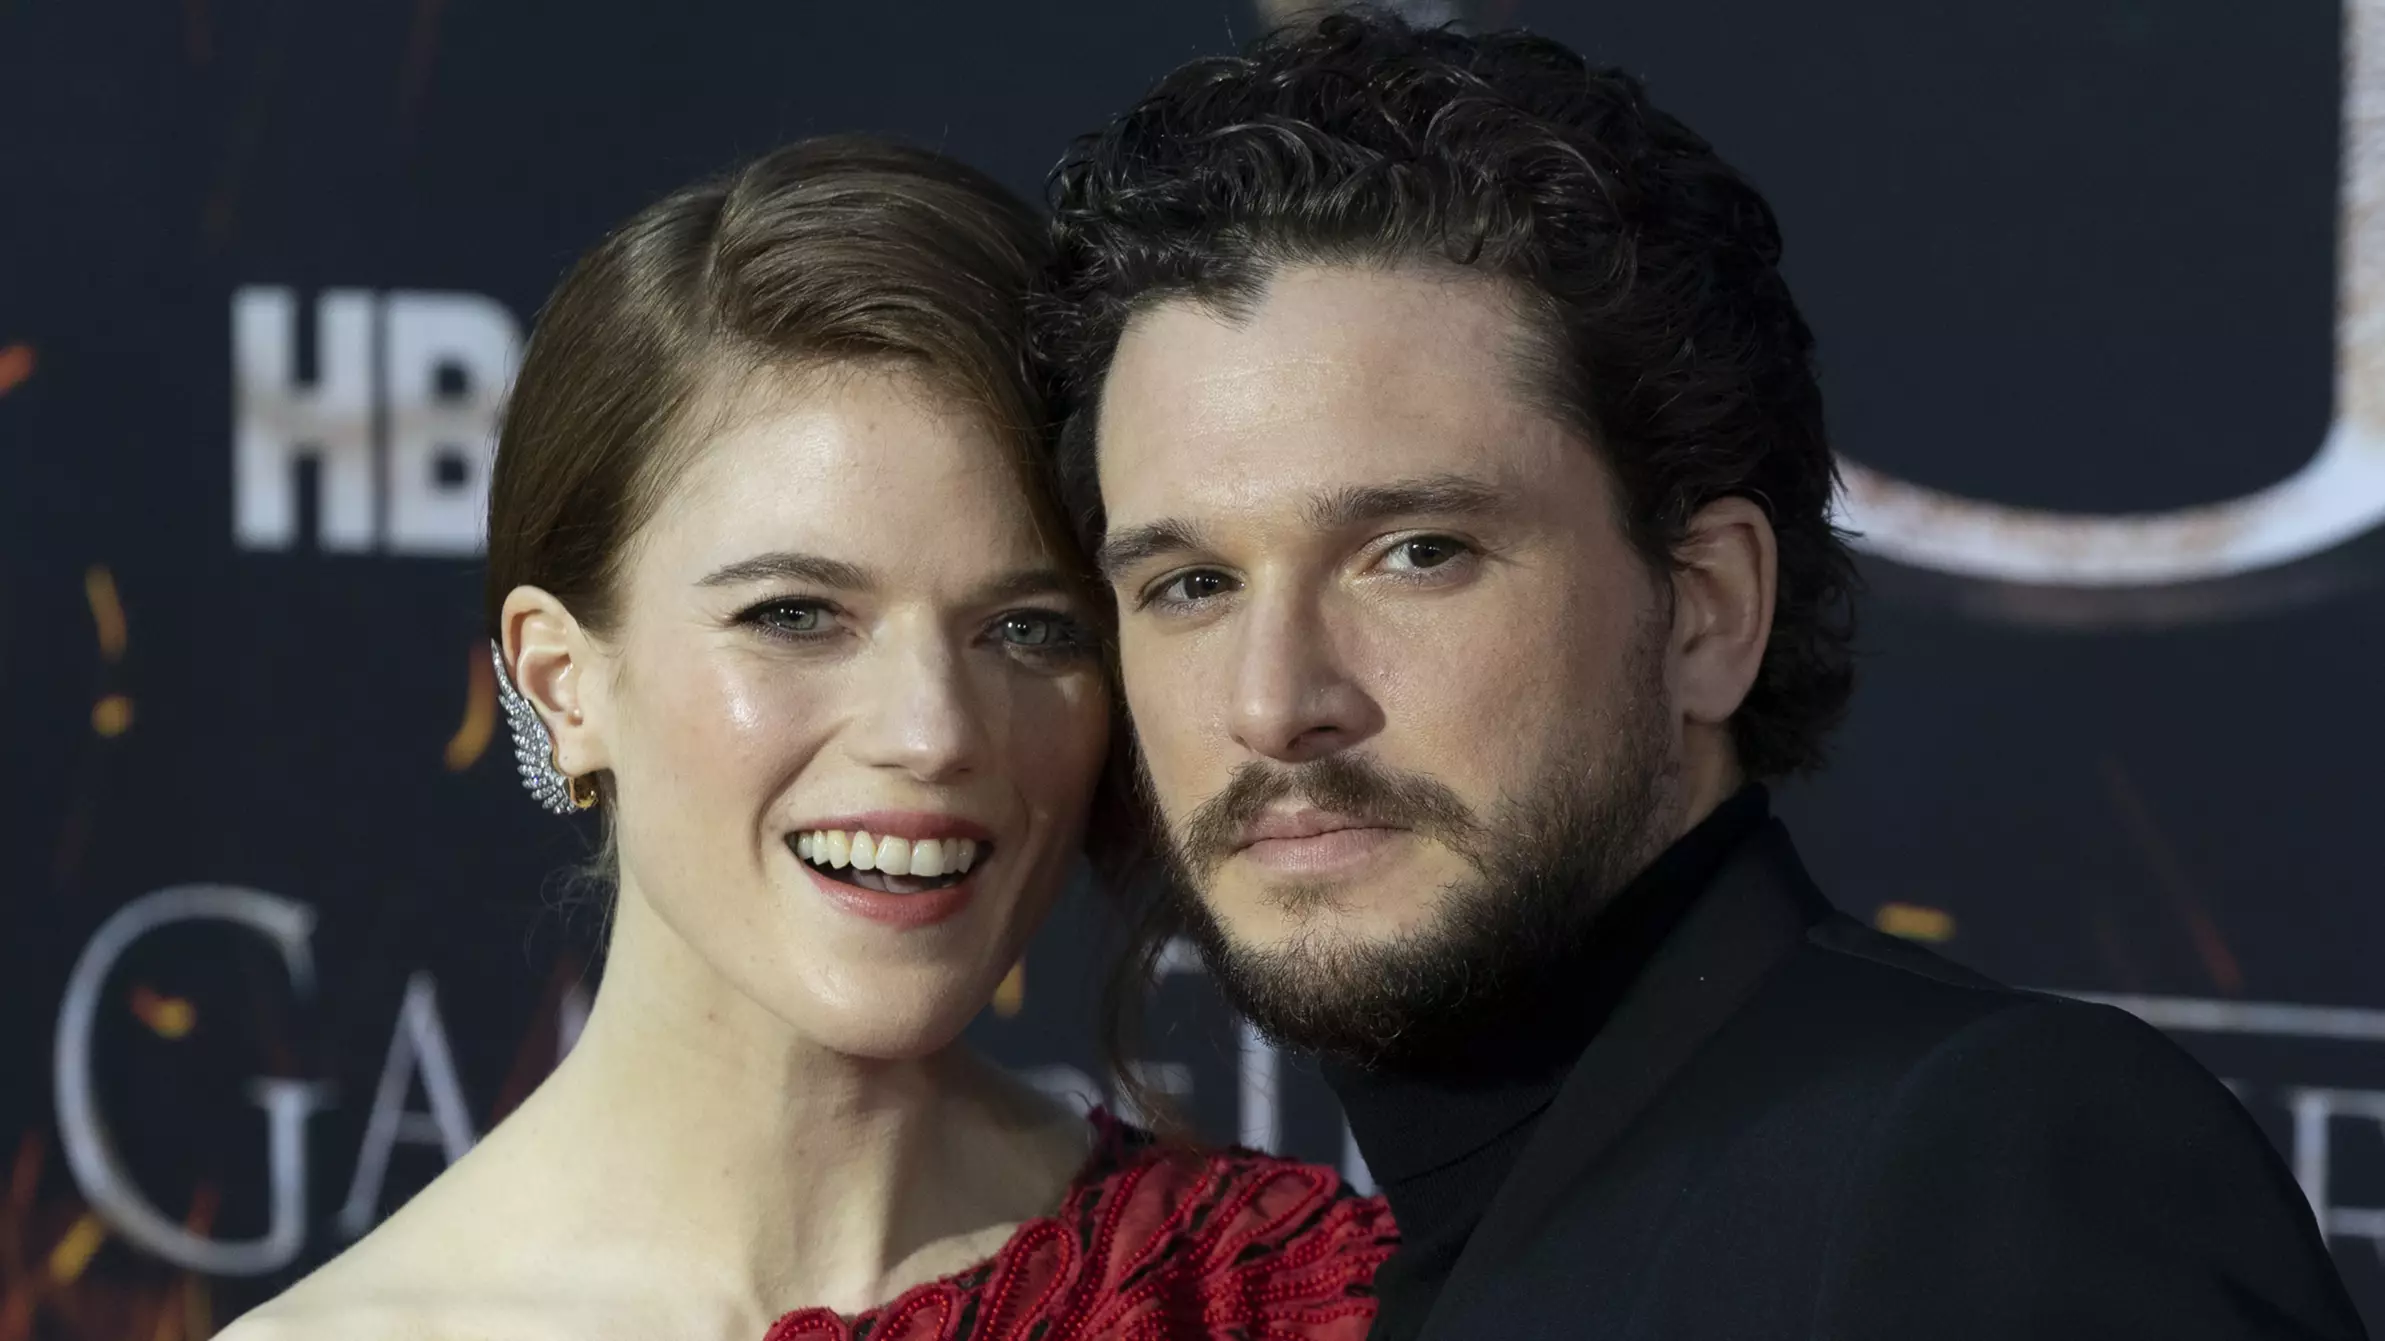 Kit Harington And Rose Leslie 'Very Happy' After Welcoming Baby Boy